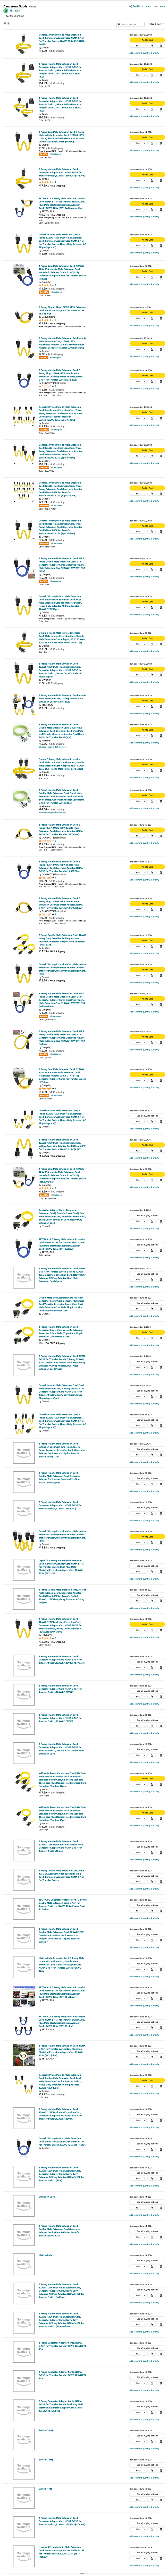 screenshot of amazon product list of suicide cords, with many many items